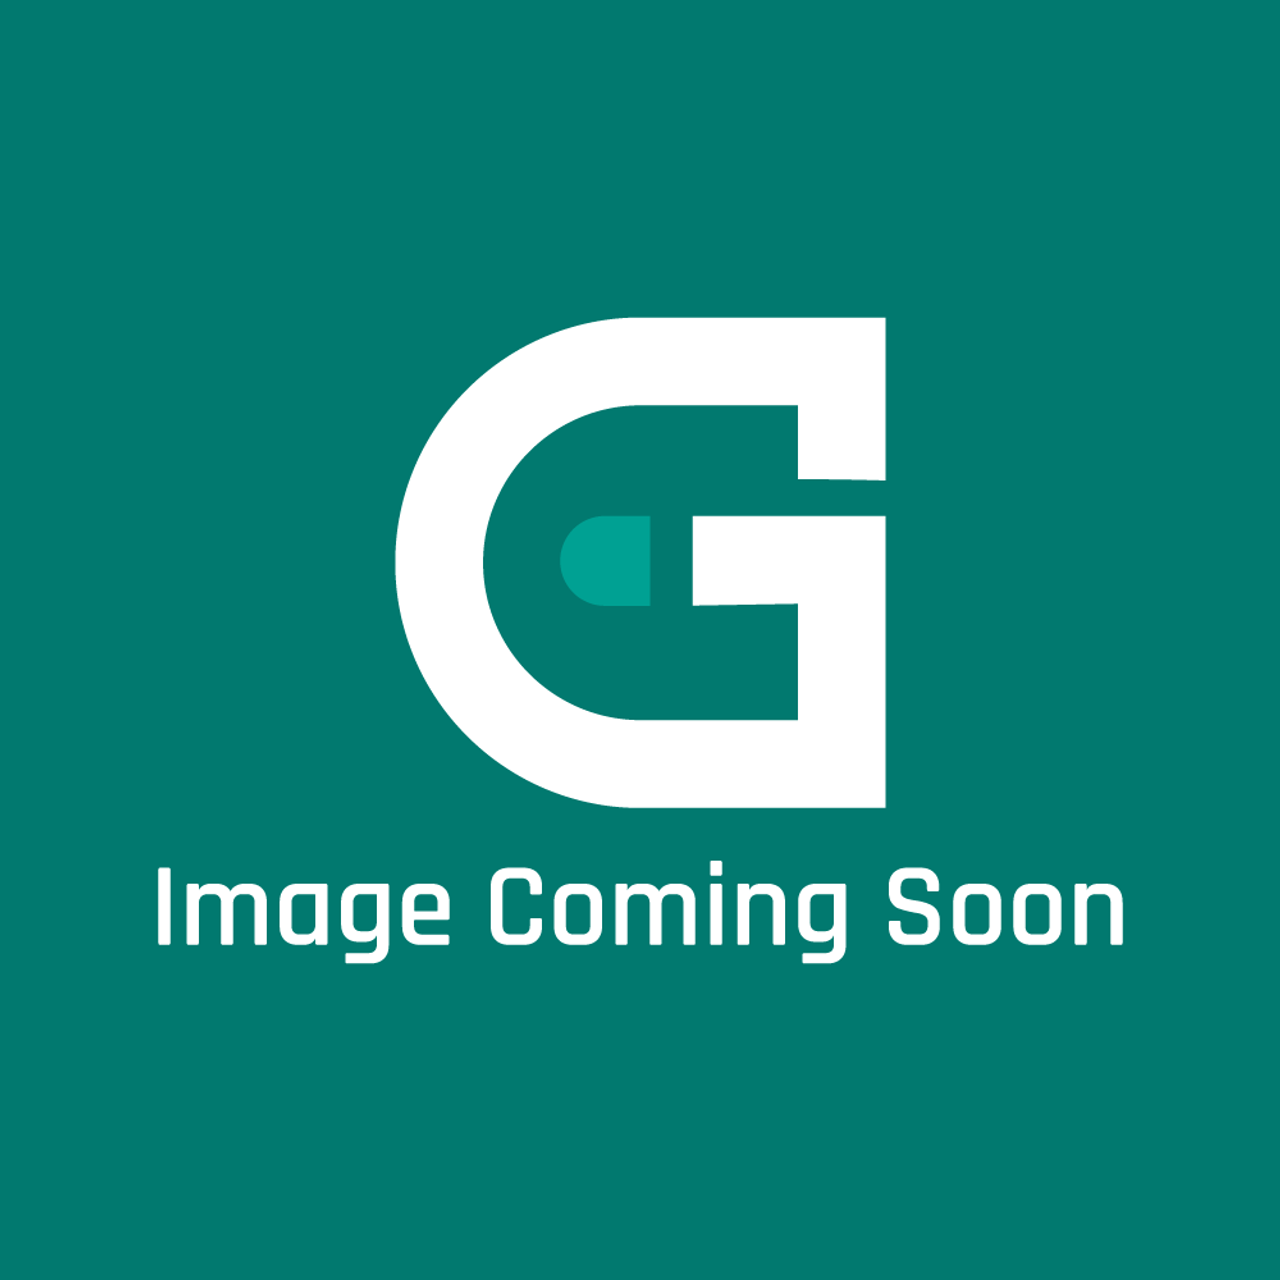 Frigidaire - Electrolux 5304494010 Handle - Image Coming Soon!